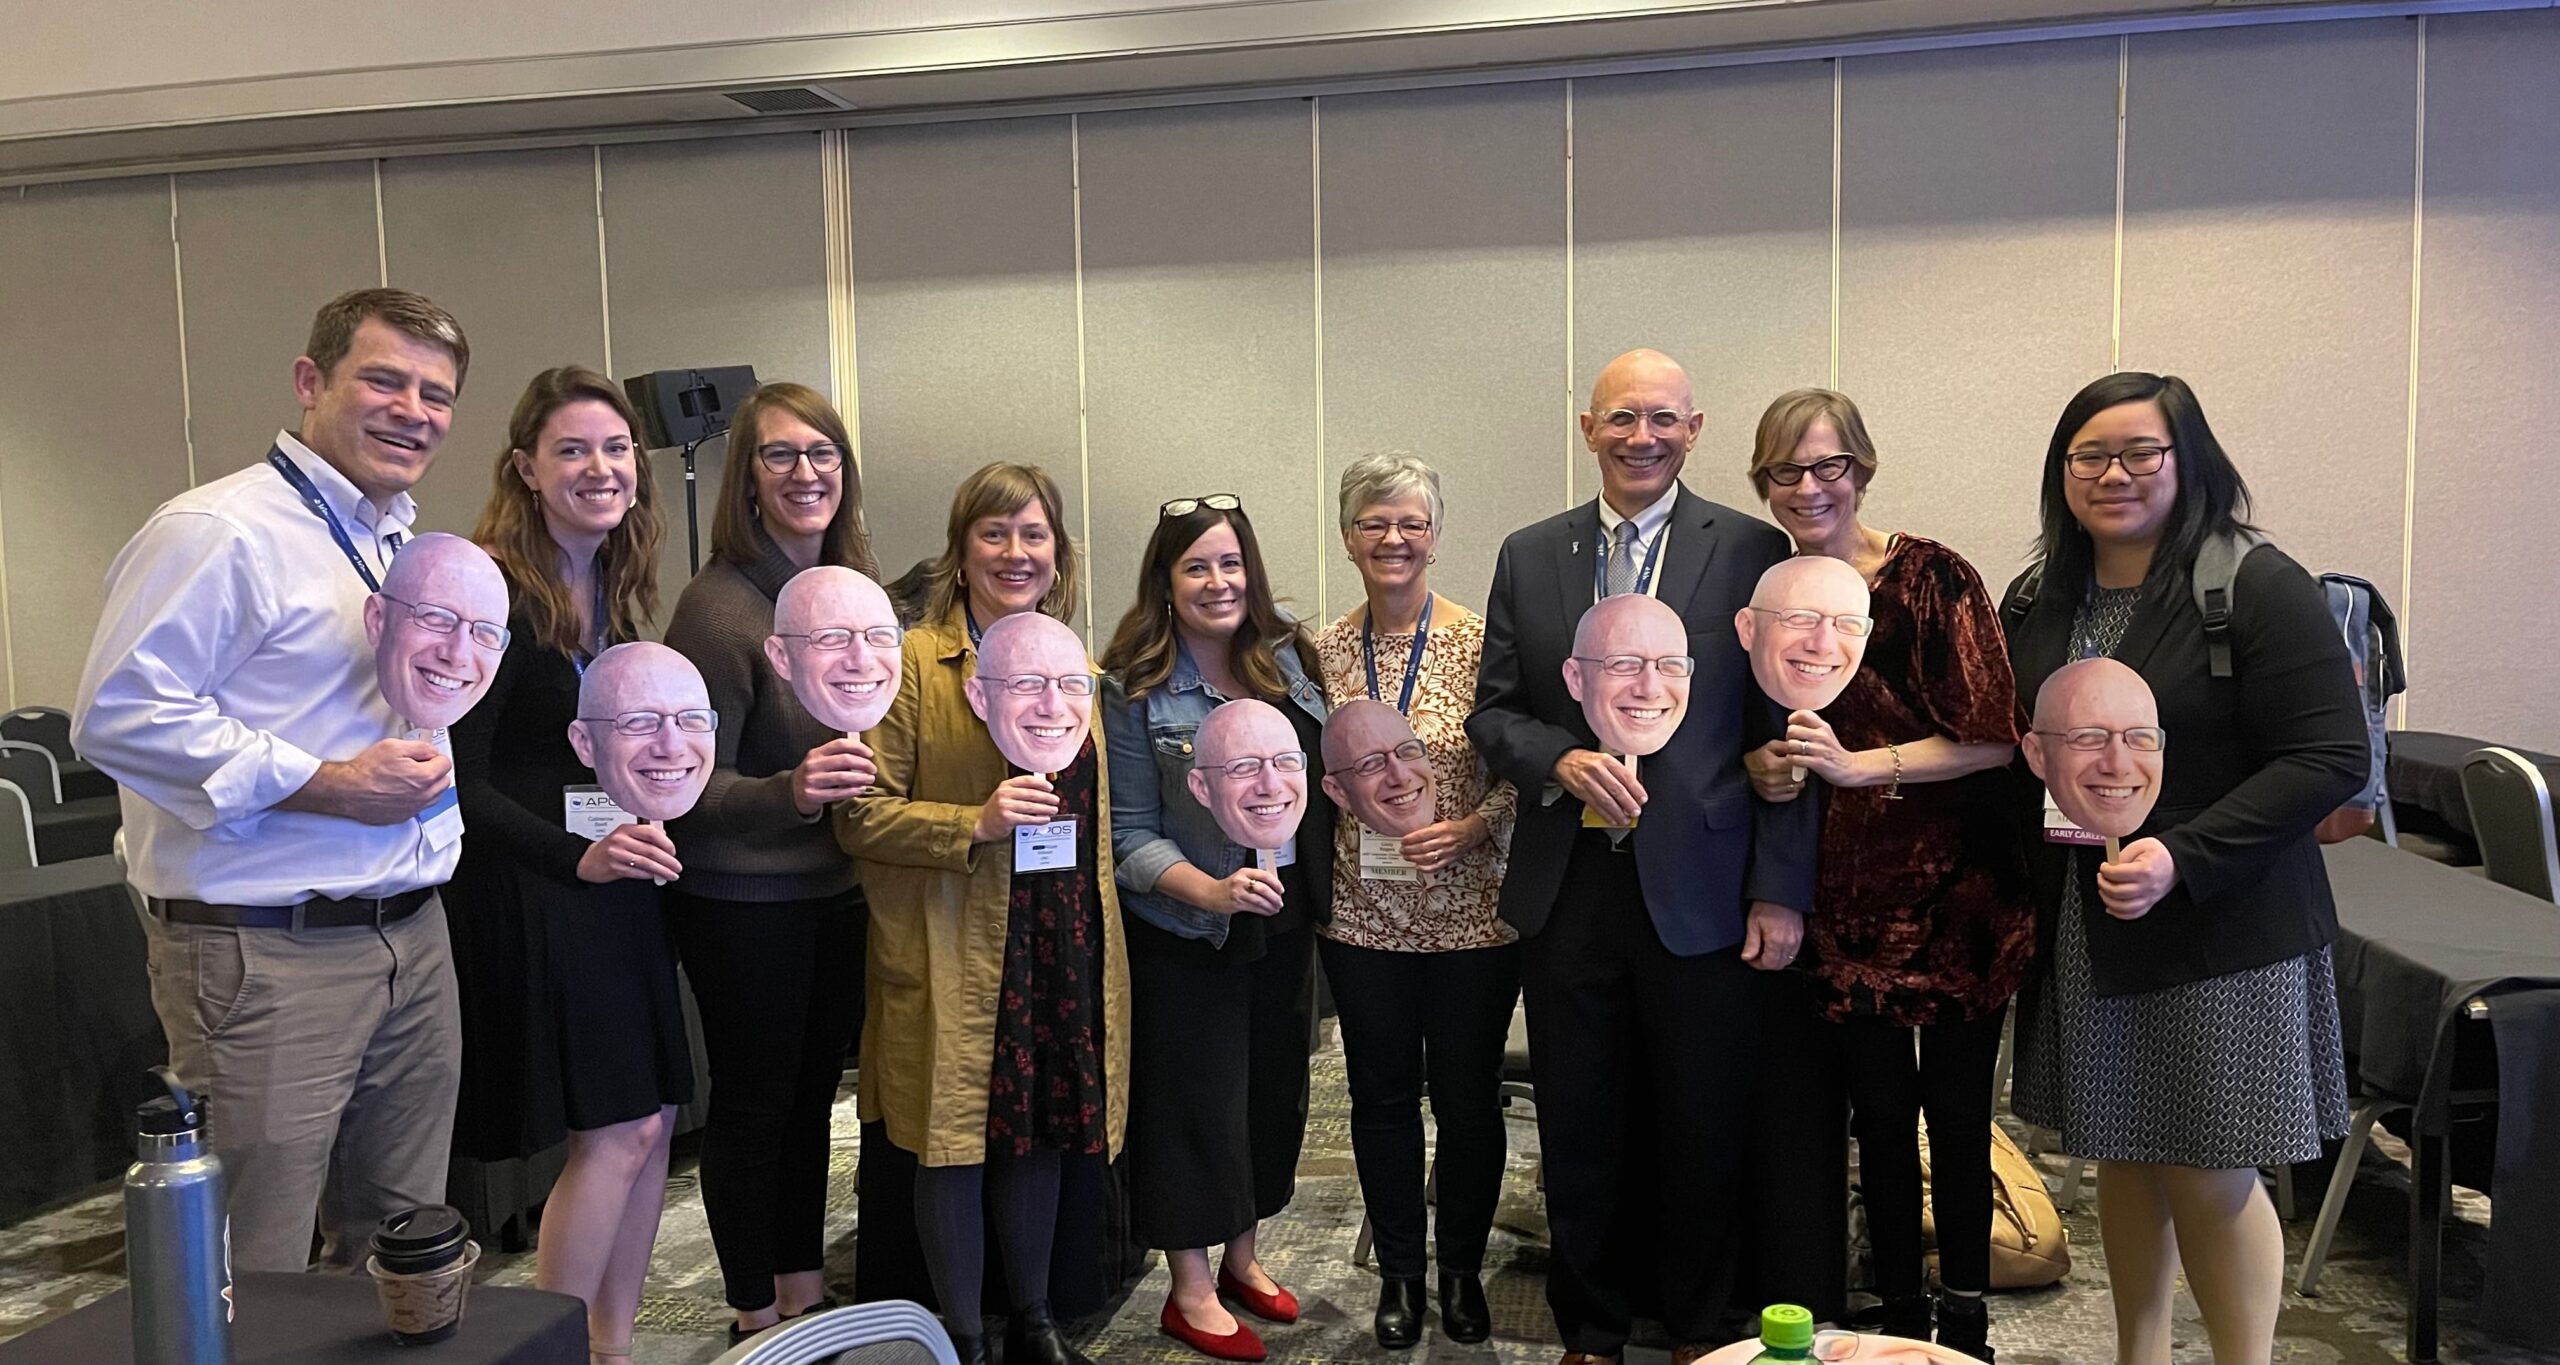 Colleagues celebrate Rosenstein at the APOS conference.